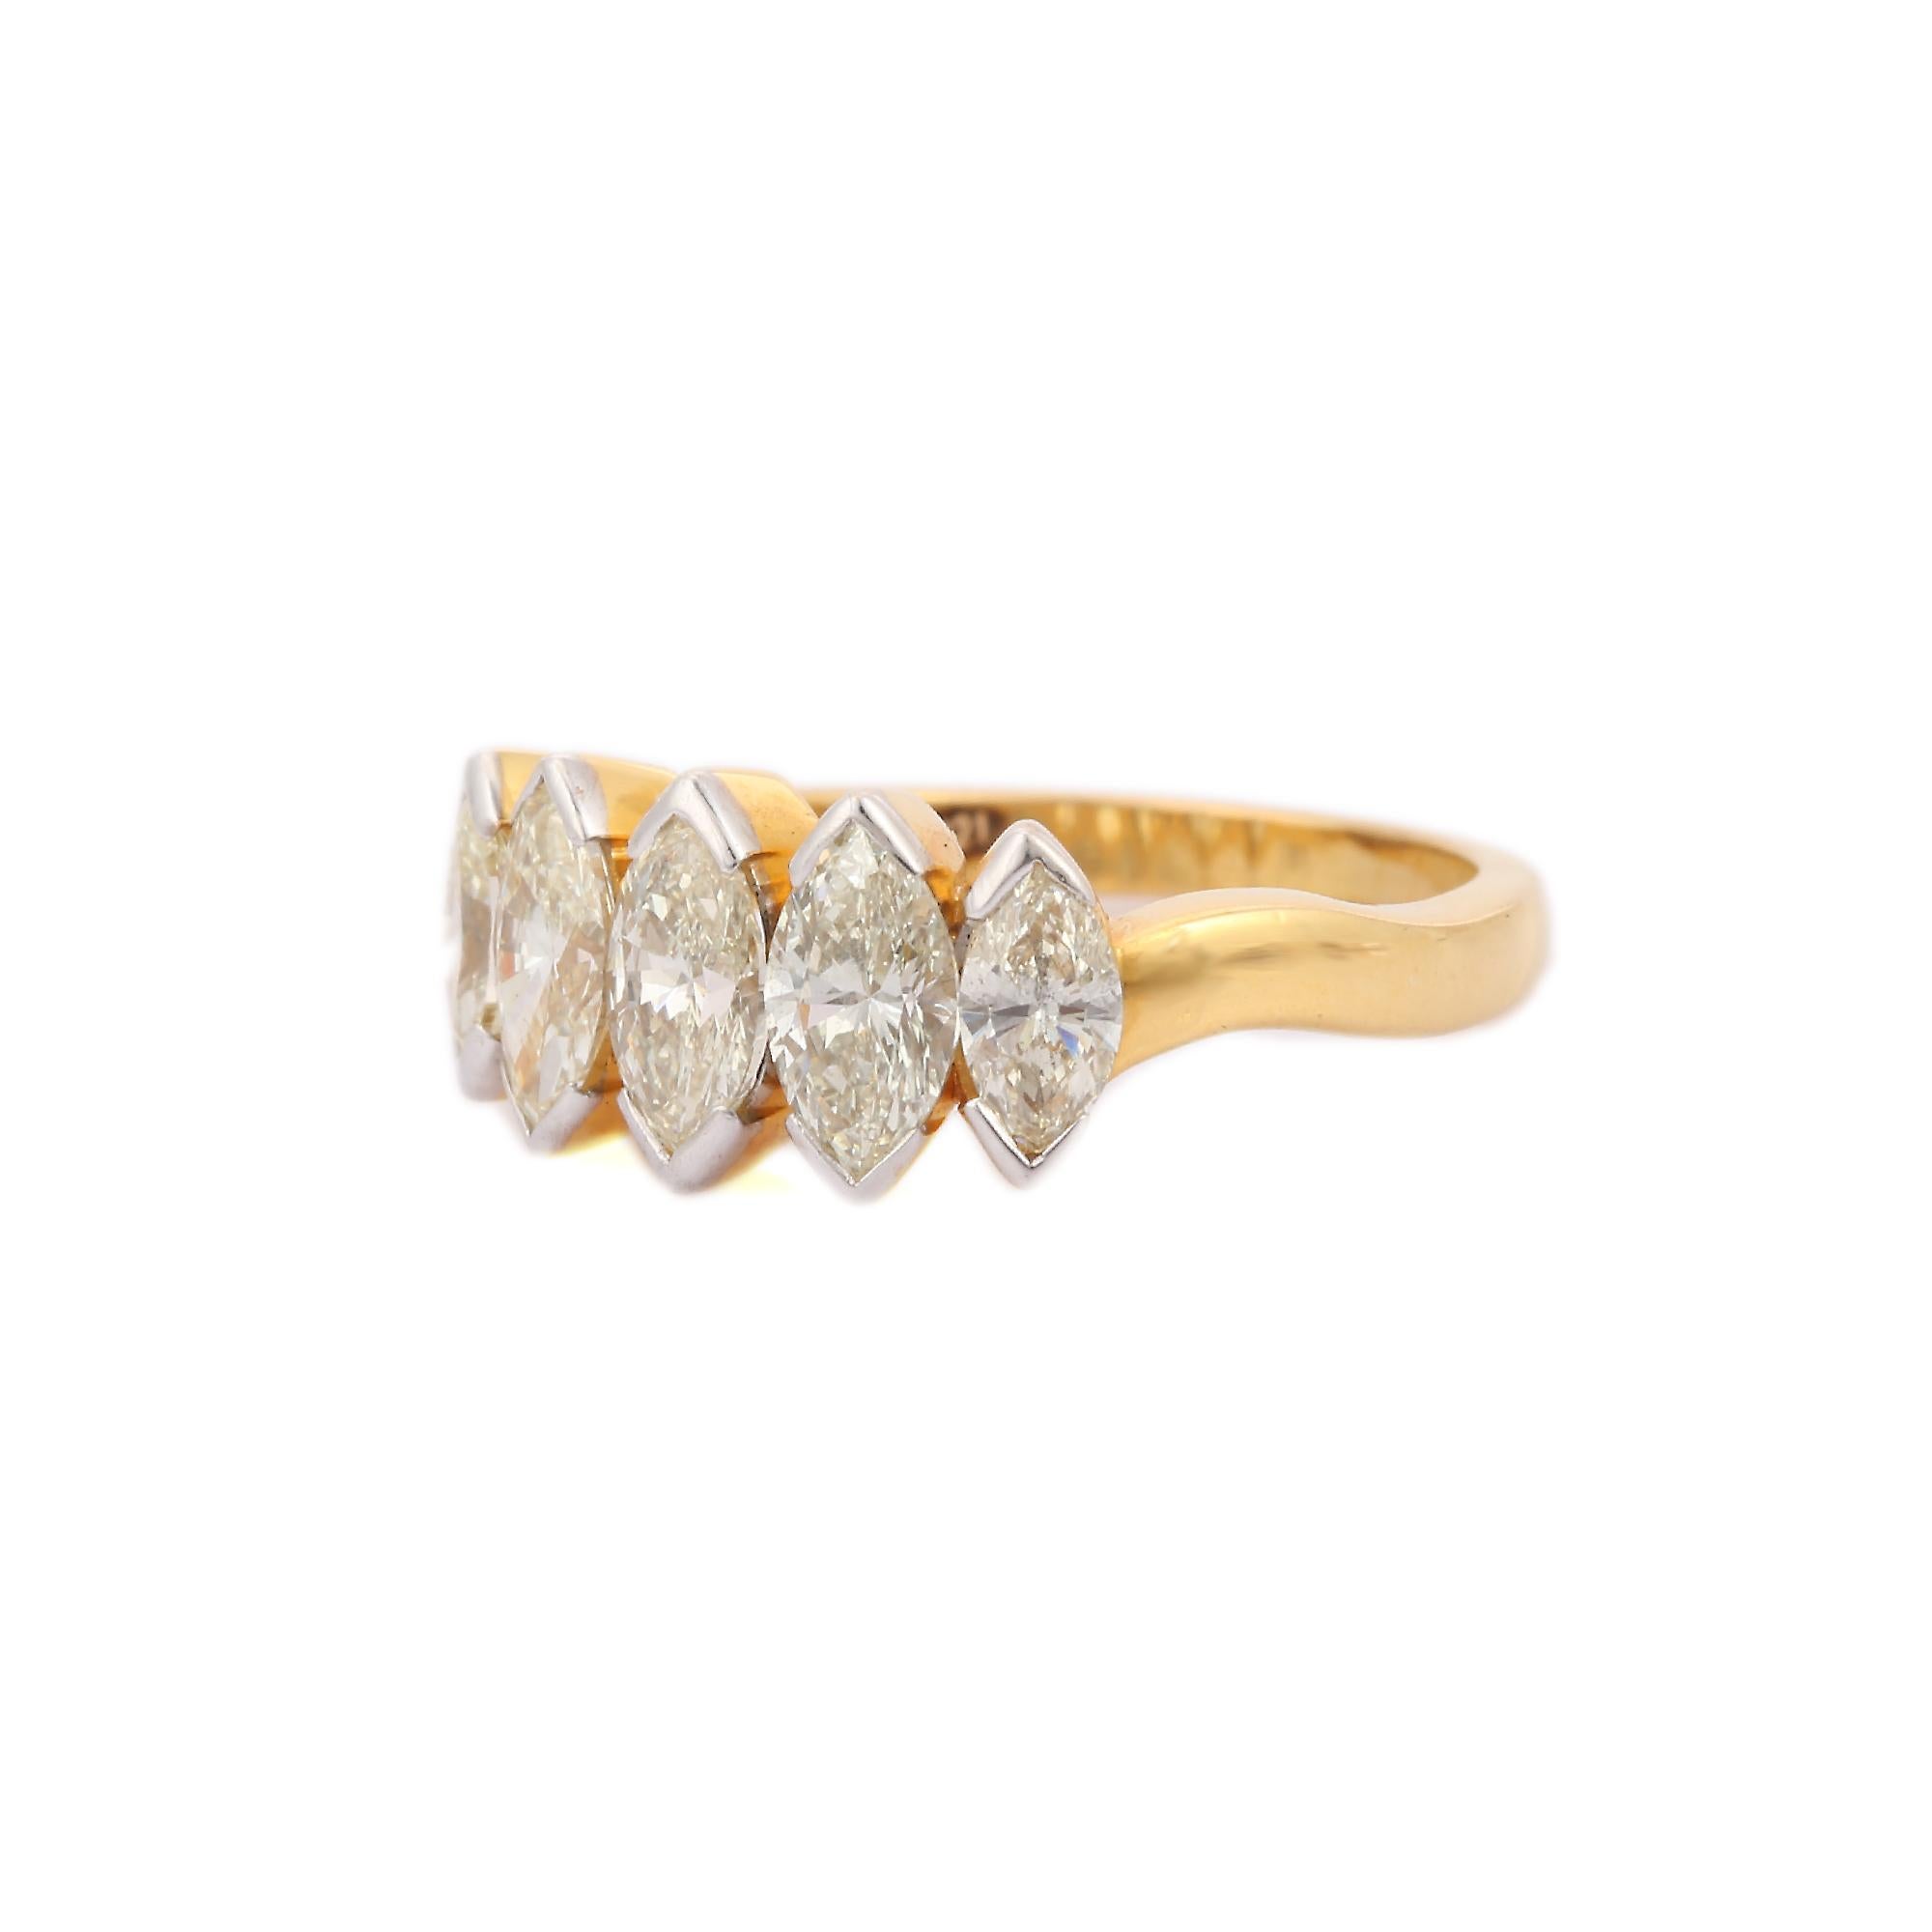 For Sale:  1.86 ct Marquise Cut Diamond Half Eternity Engagement Ring in 18K Yellow Gold  2